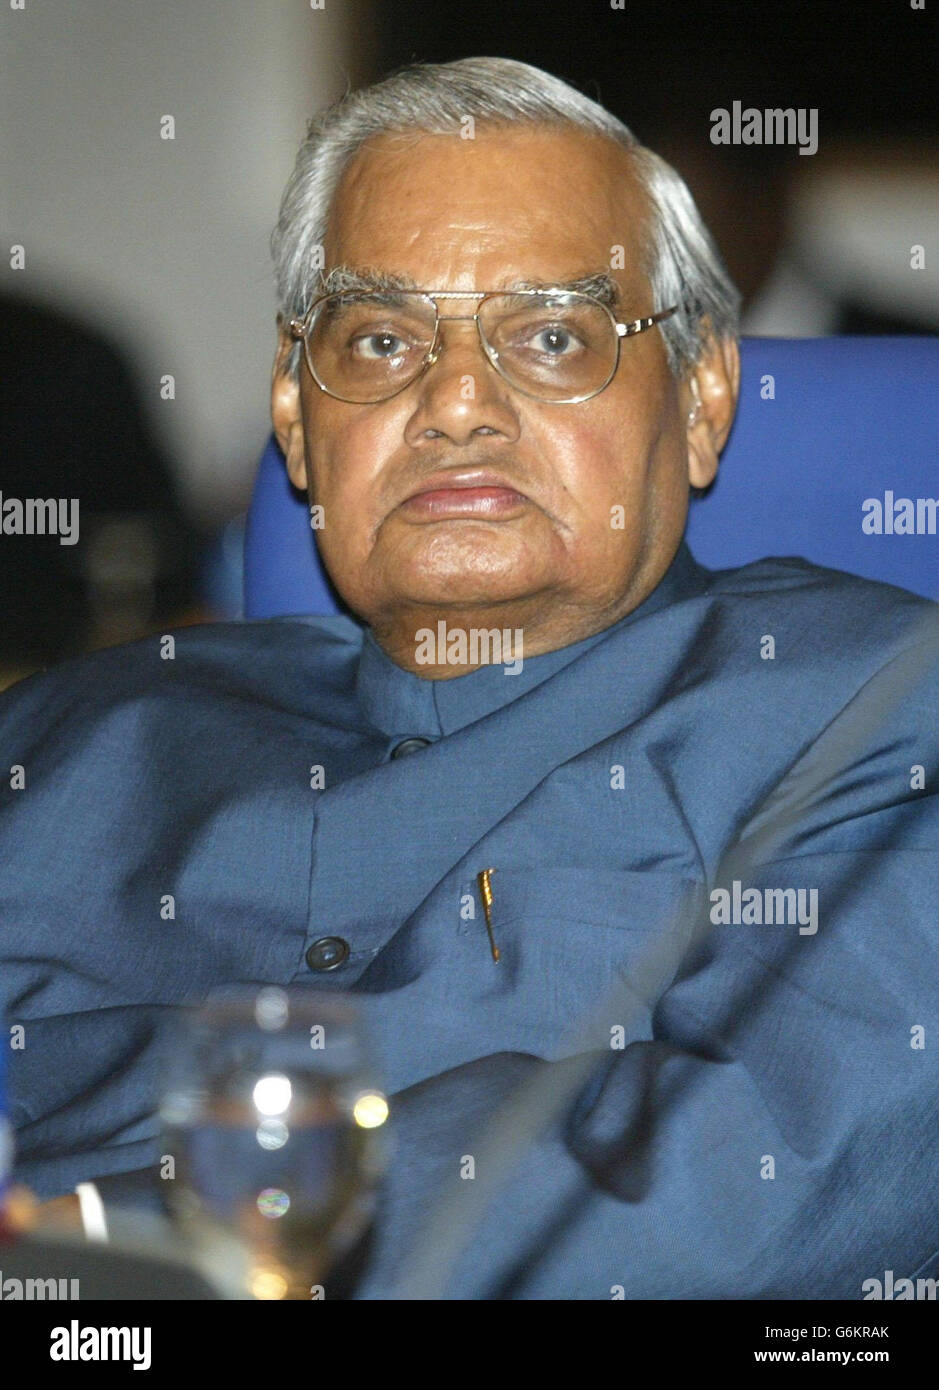 Indian Prime Minister Atal Bihari Vajpayee attends the start of the First Executive session of the Commonwealth Heads of Government Meeting in Abuja, Nigeria. * British Prime Minister Tony Blair today failed to get the swift resolution he wanted to continue Zimbabwe's suspension from the Commonwealth. Stock Photo